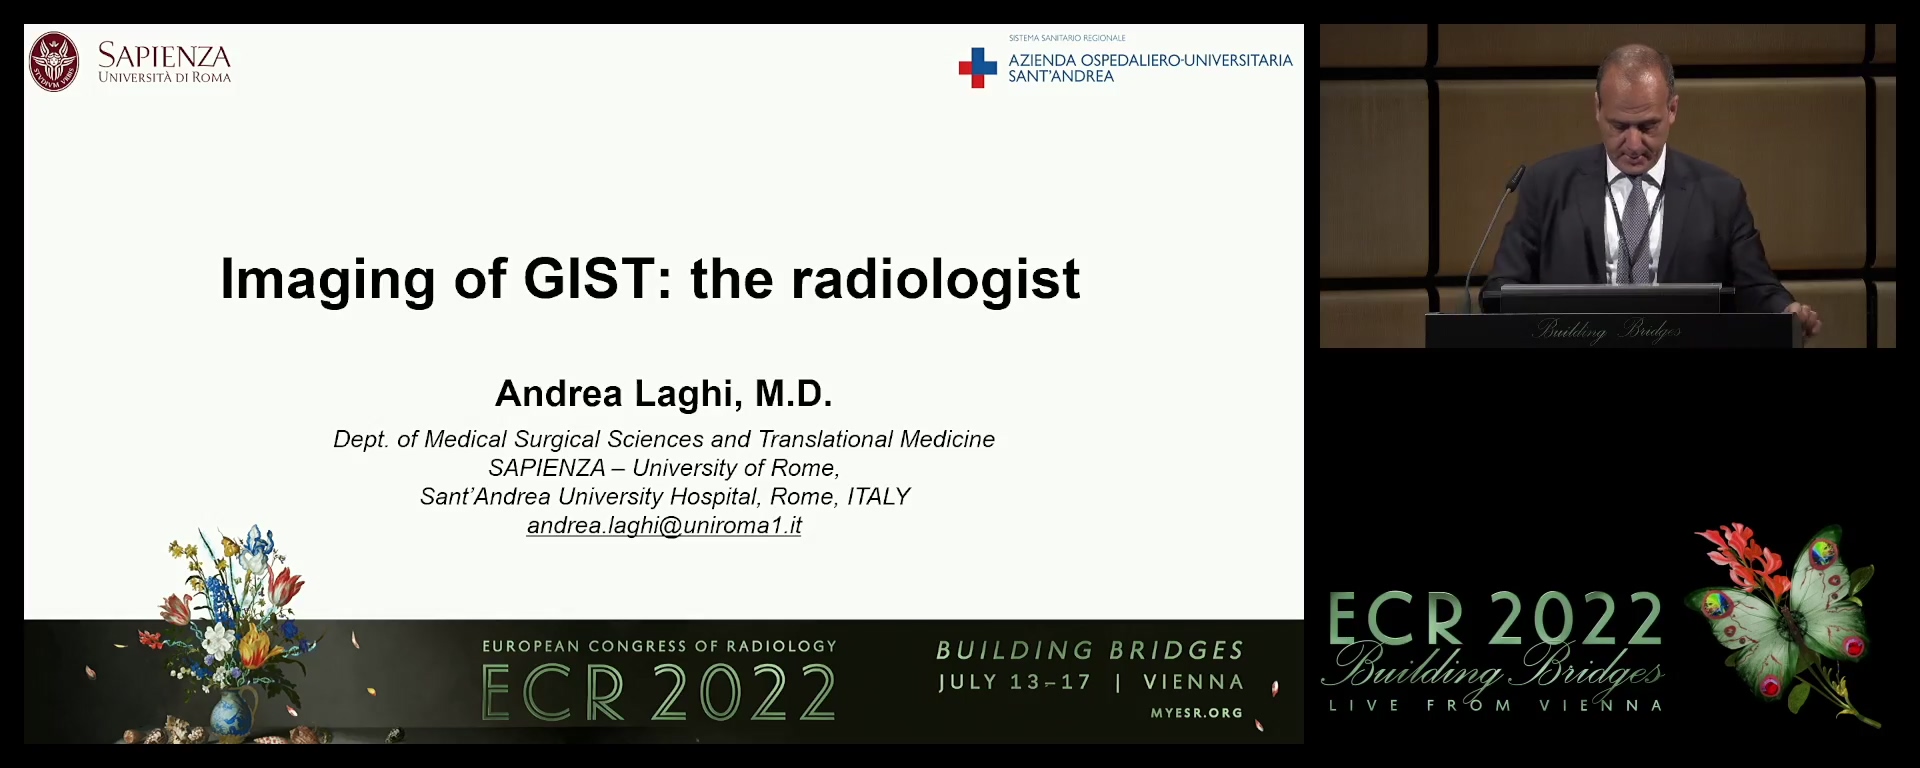 Imaging of GIST: the radiologist